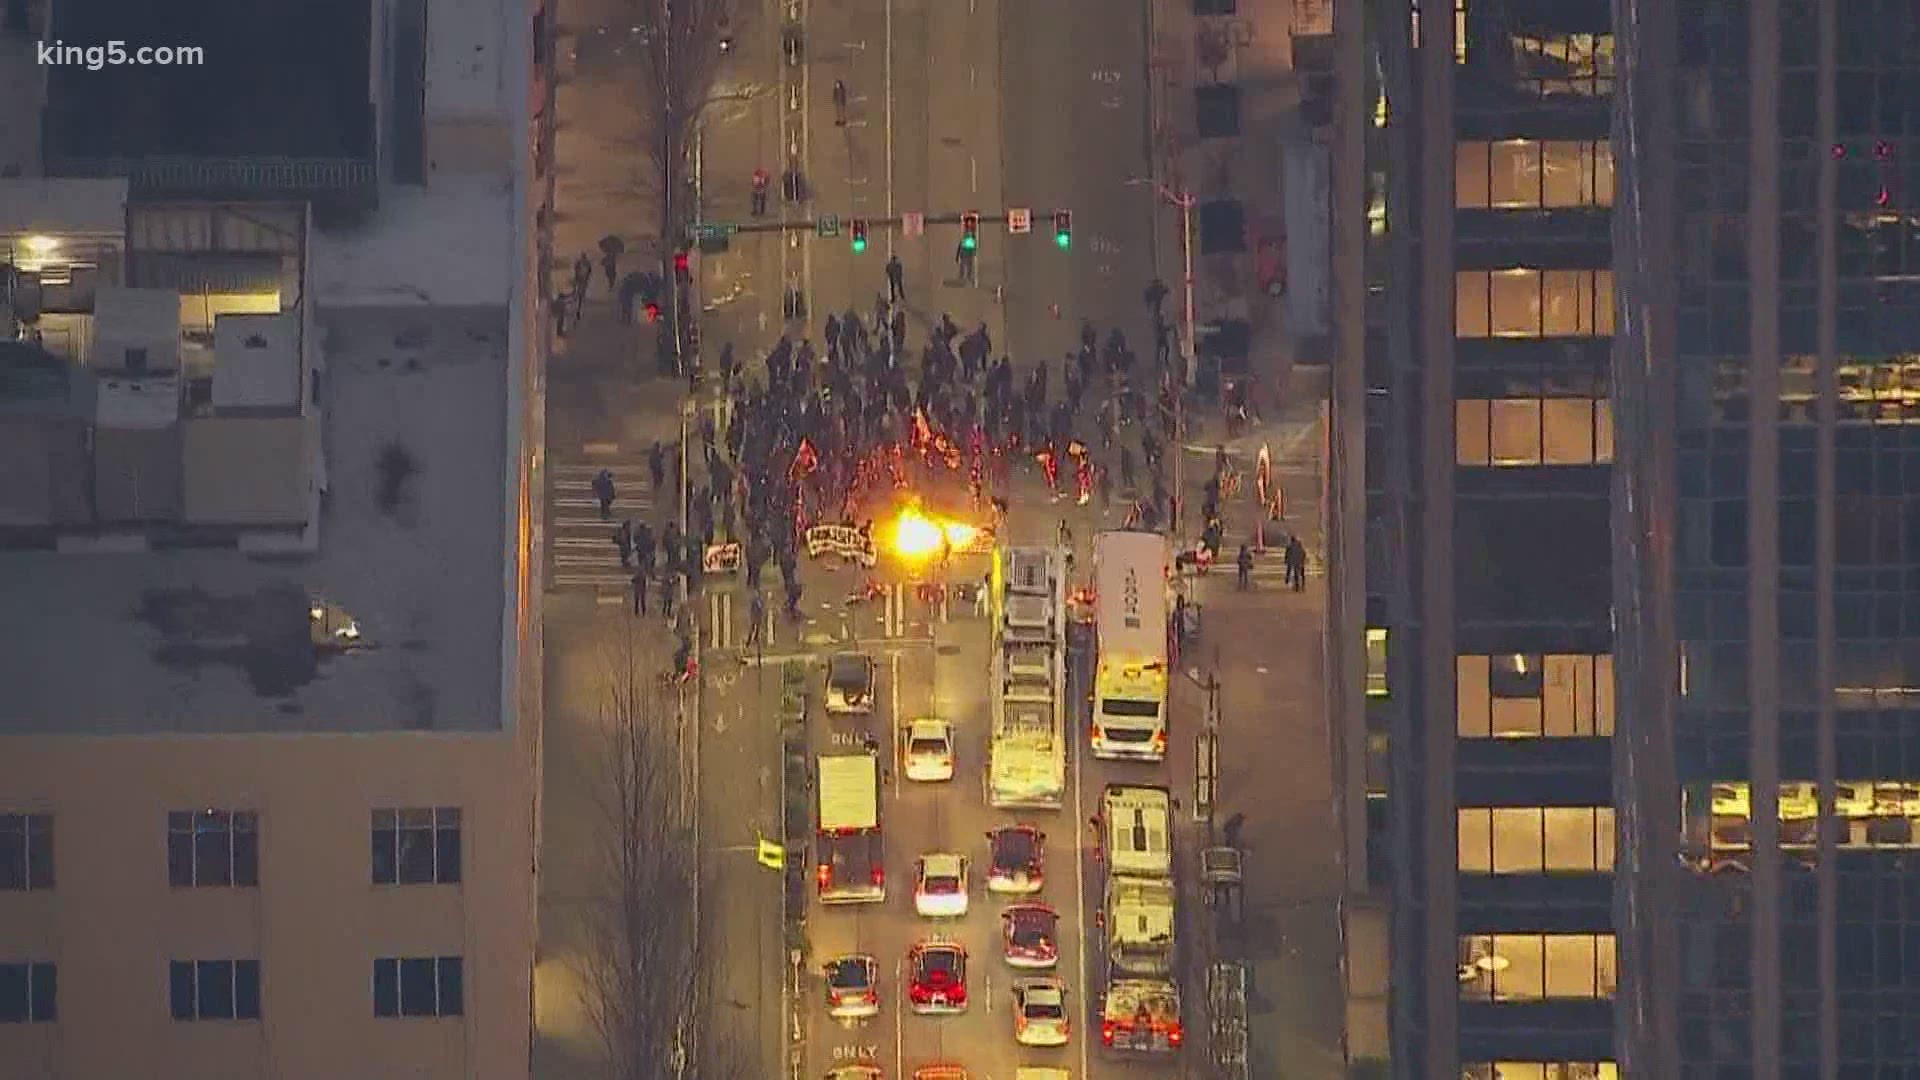 A group of demonstrators marched in downtown Seattle Wednesday and caused property damage. Seattle police made arrests.